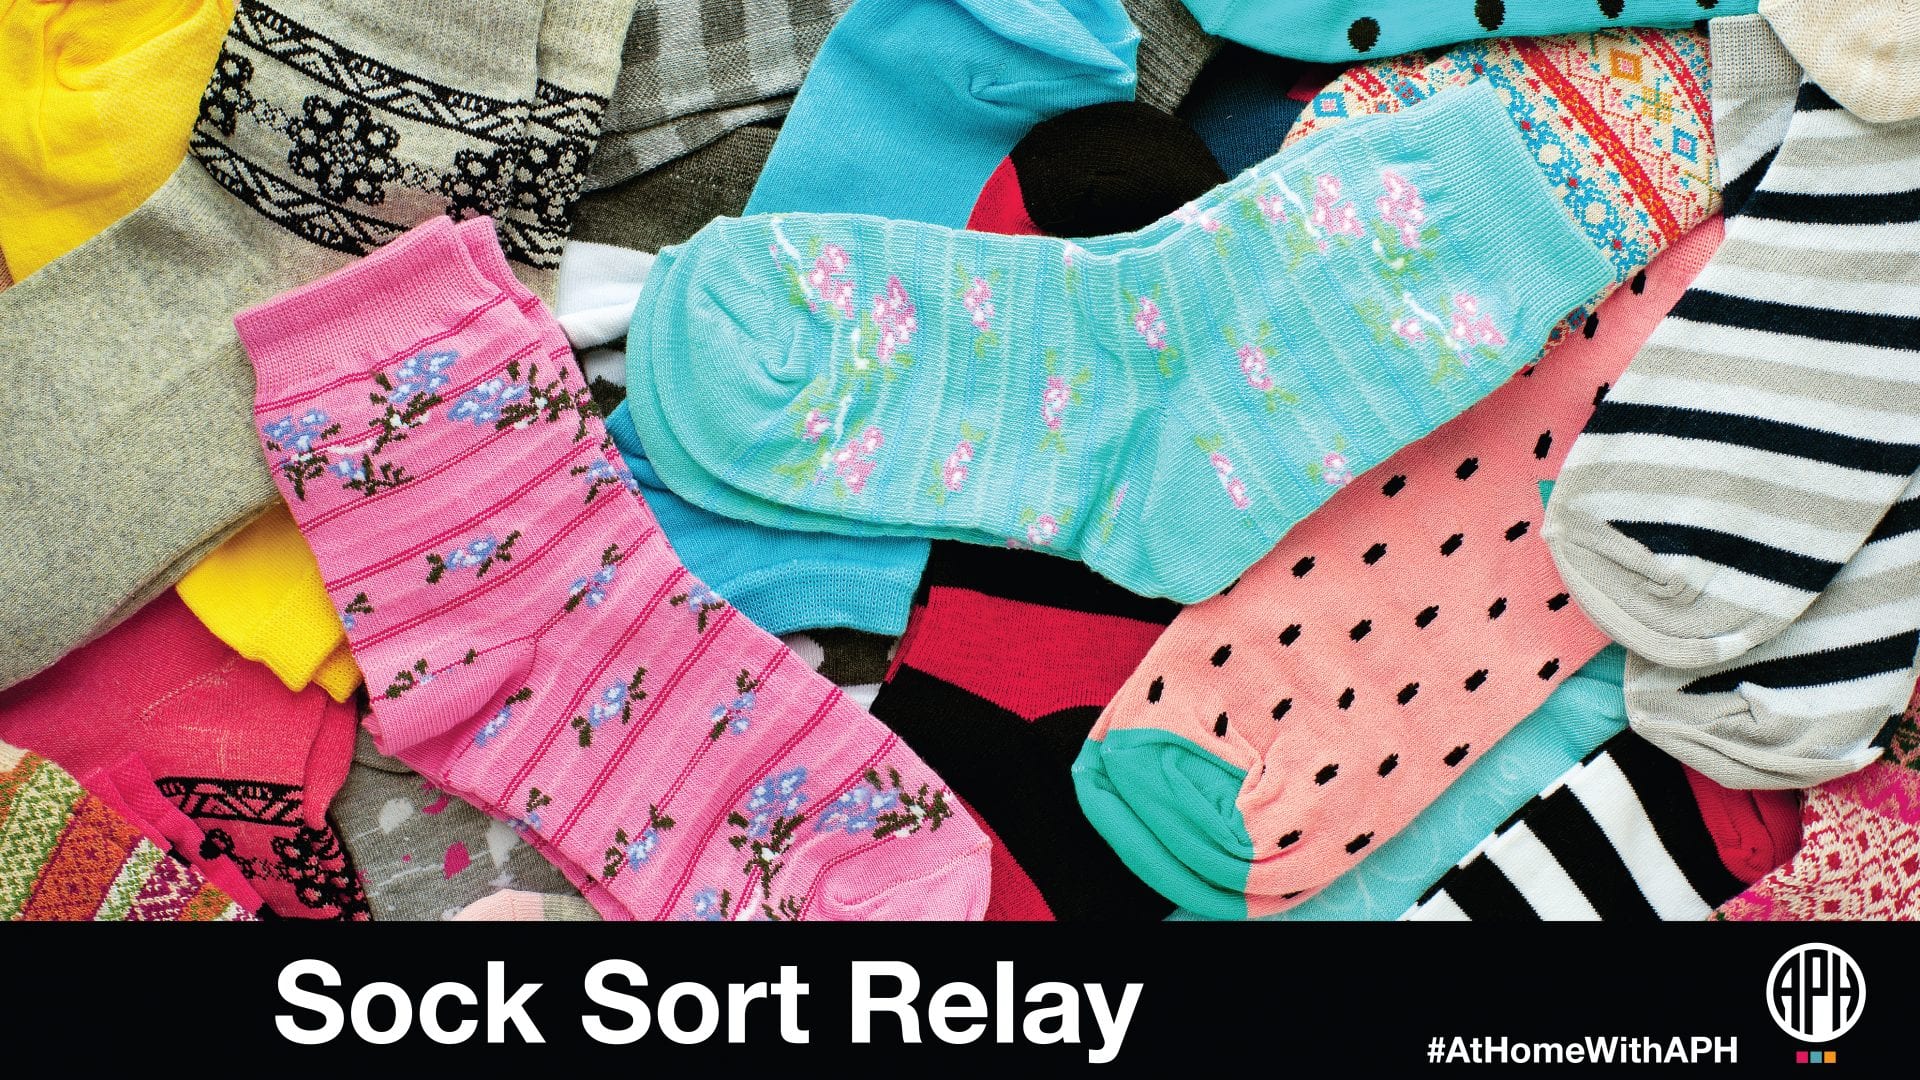 a pile of a variety of colorful socks. Text reads "Sock Sort Relay #AtHomeWithAPH" APH Logo